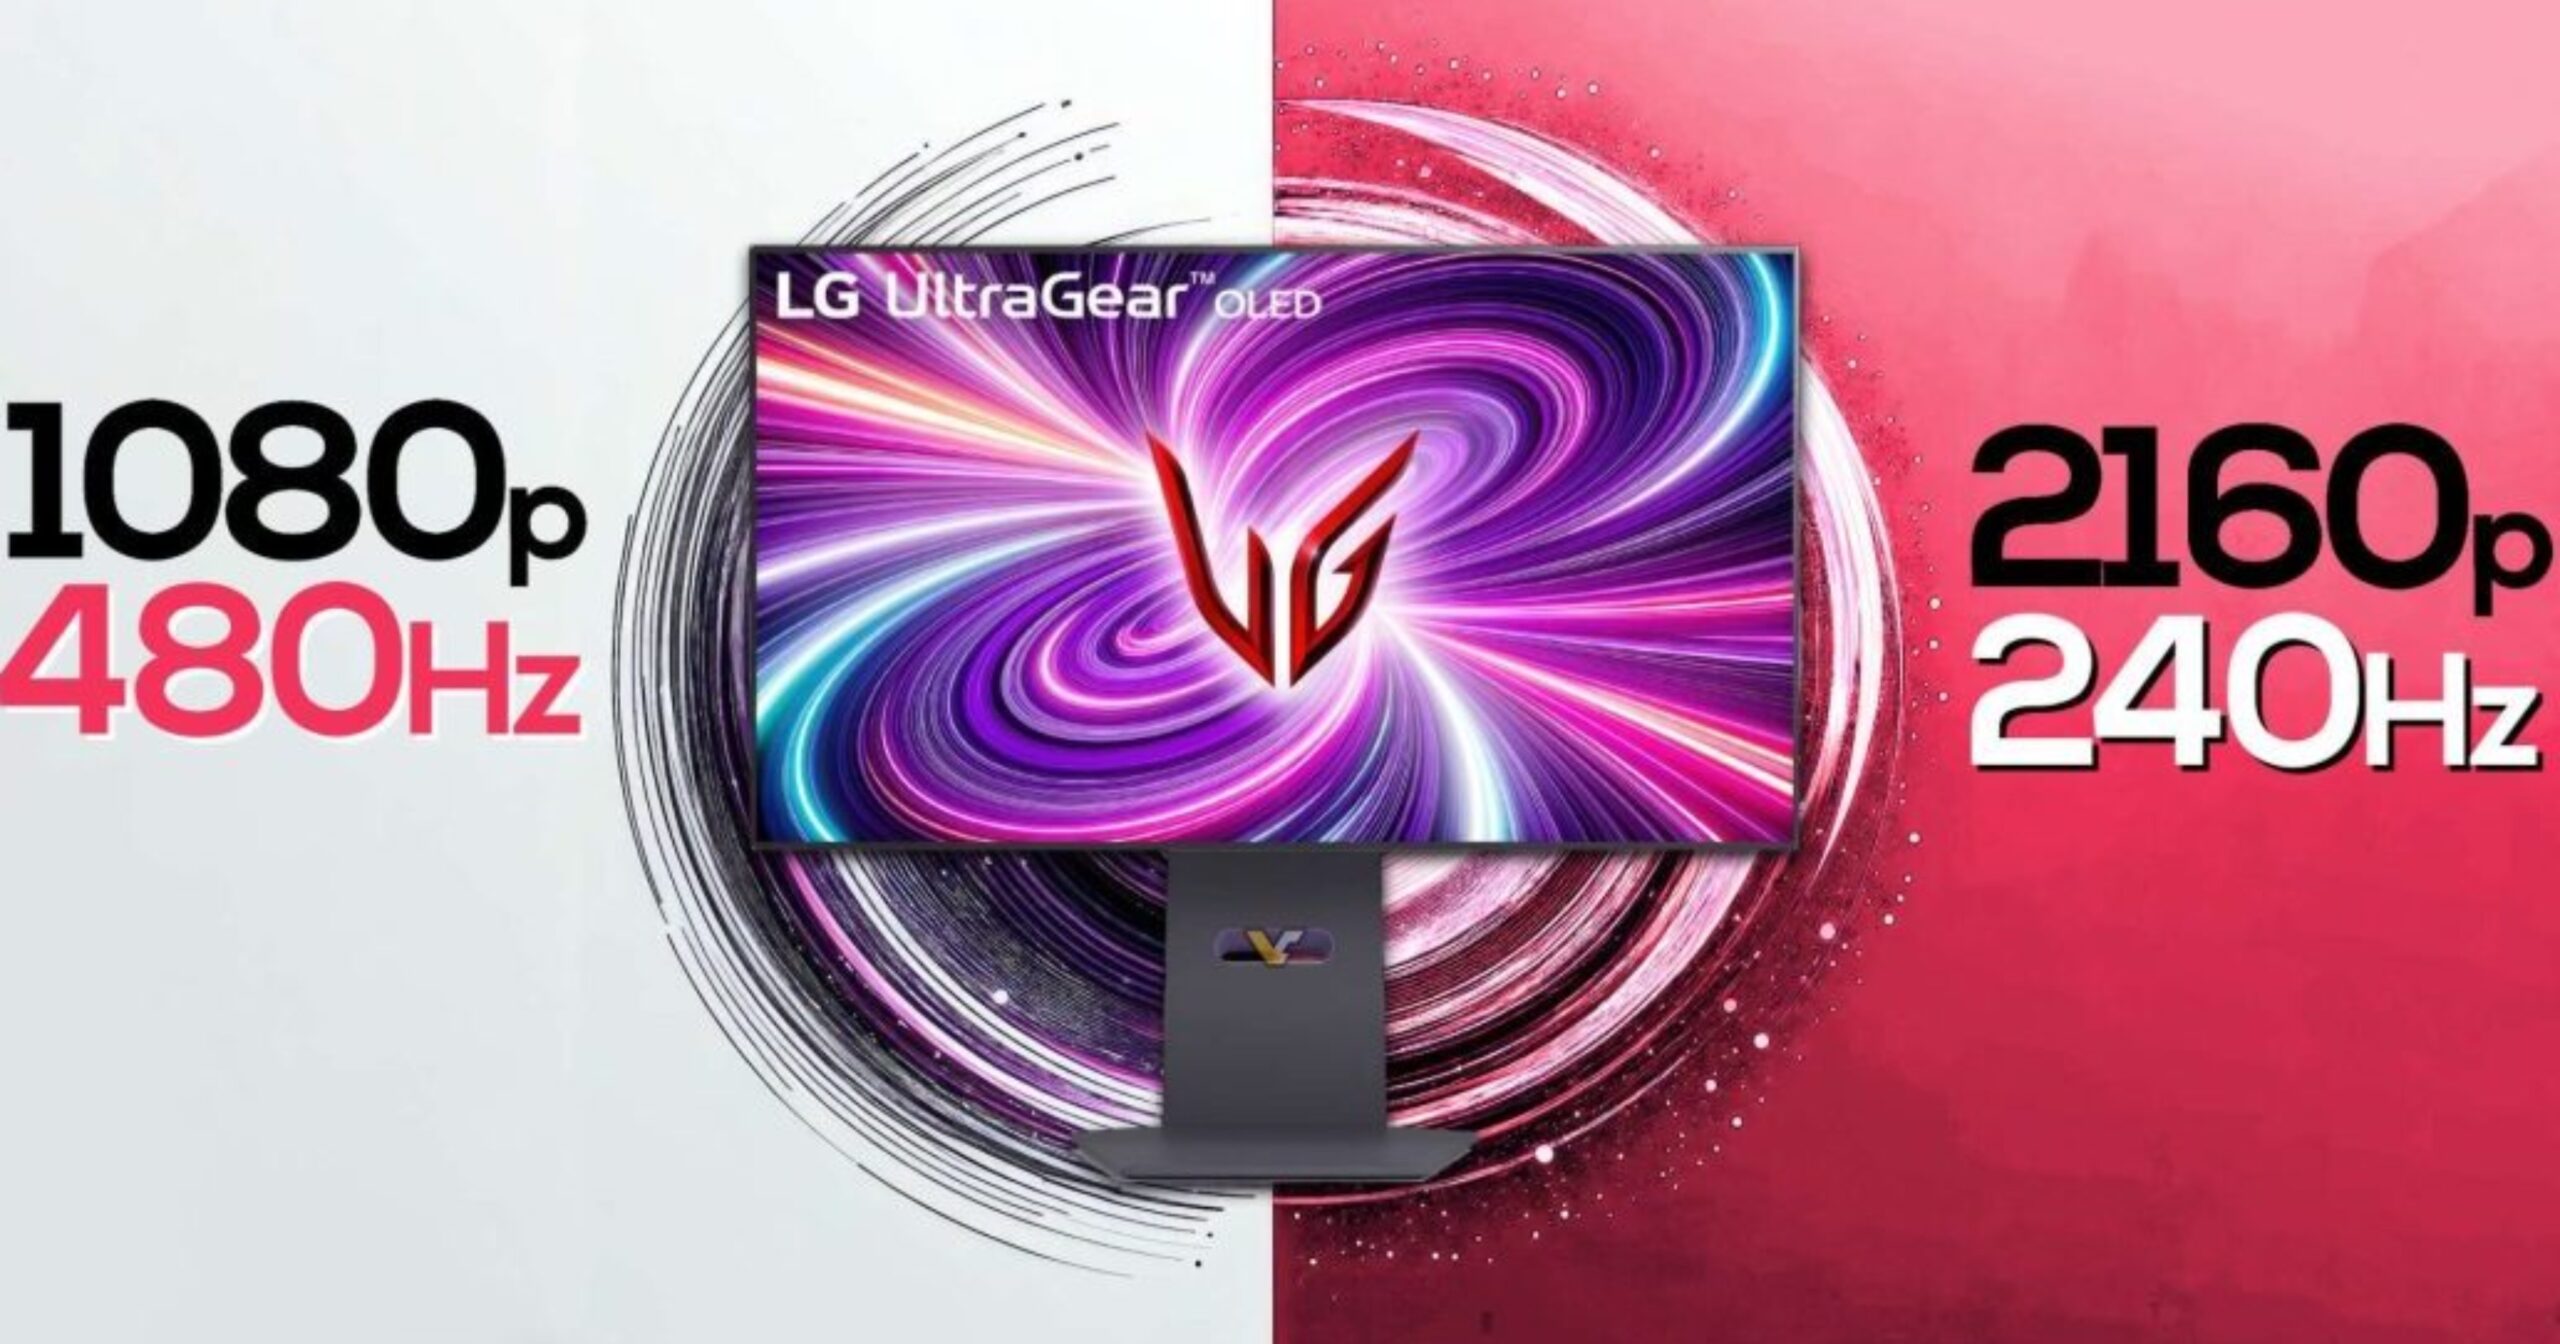 LG Unveils Dual-Hz Technology in Latest UltraGear OLED Gaming Monitors